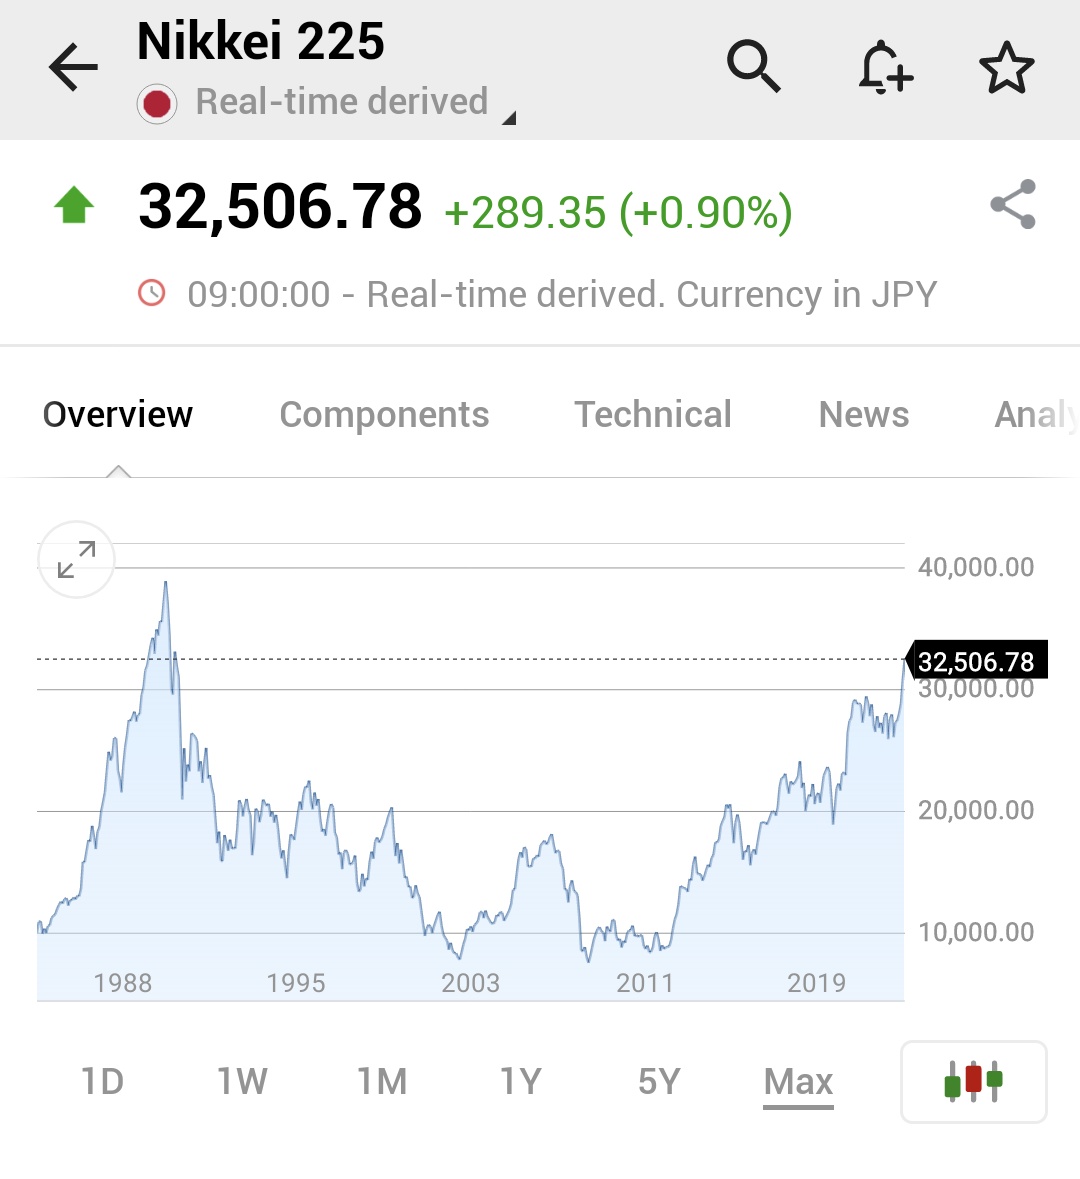 ⚠️BREAKING:

*JAPAN'S NIKKEI 225 RISES TO NEW 33-YEAR HIGH, ENDS AT HIGHEST LEVEL SINCE 1990

investing.com/indices/japan-…

🇯🇵🇯🇵